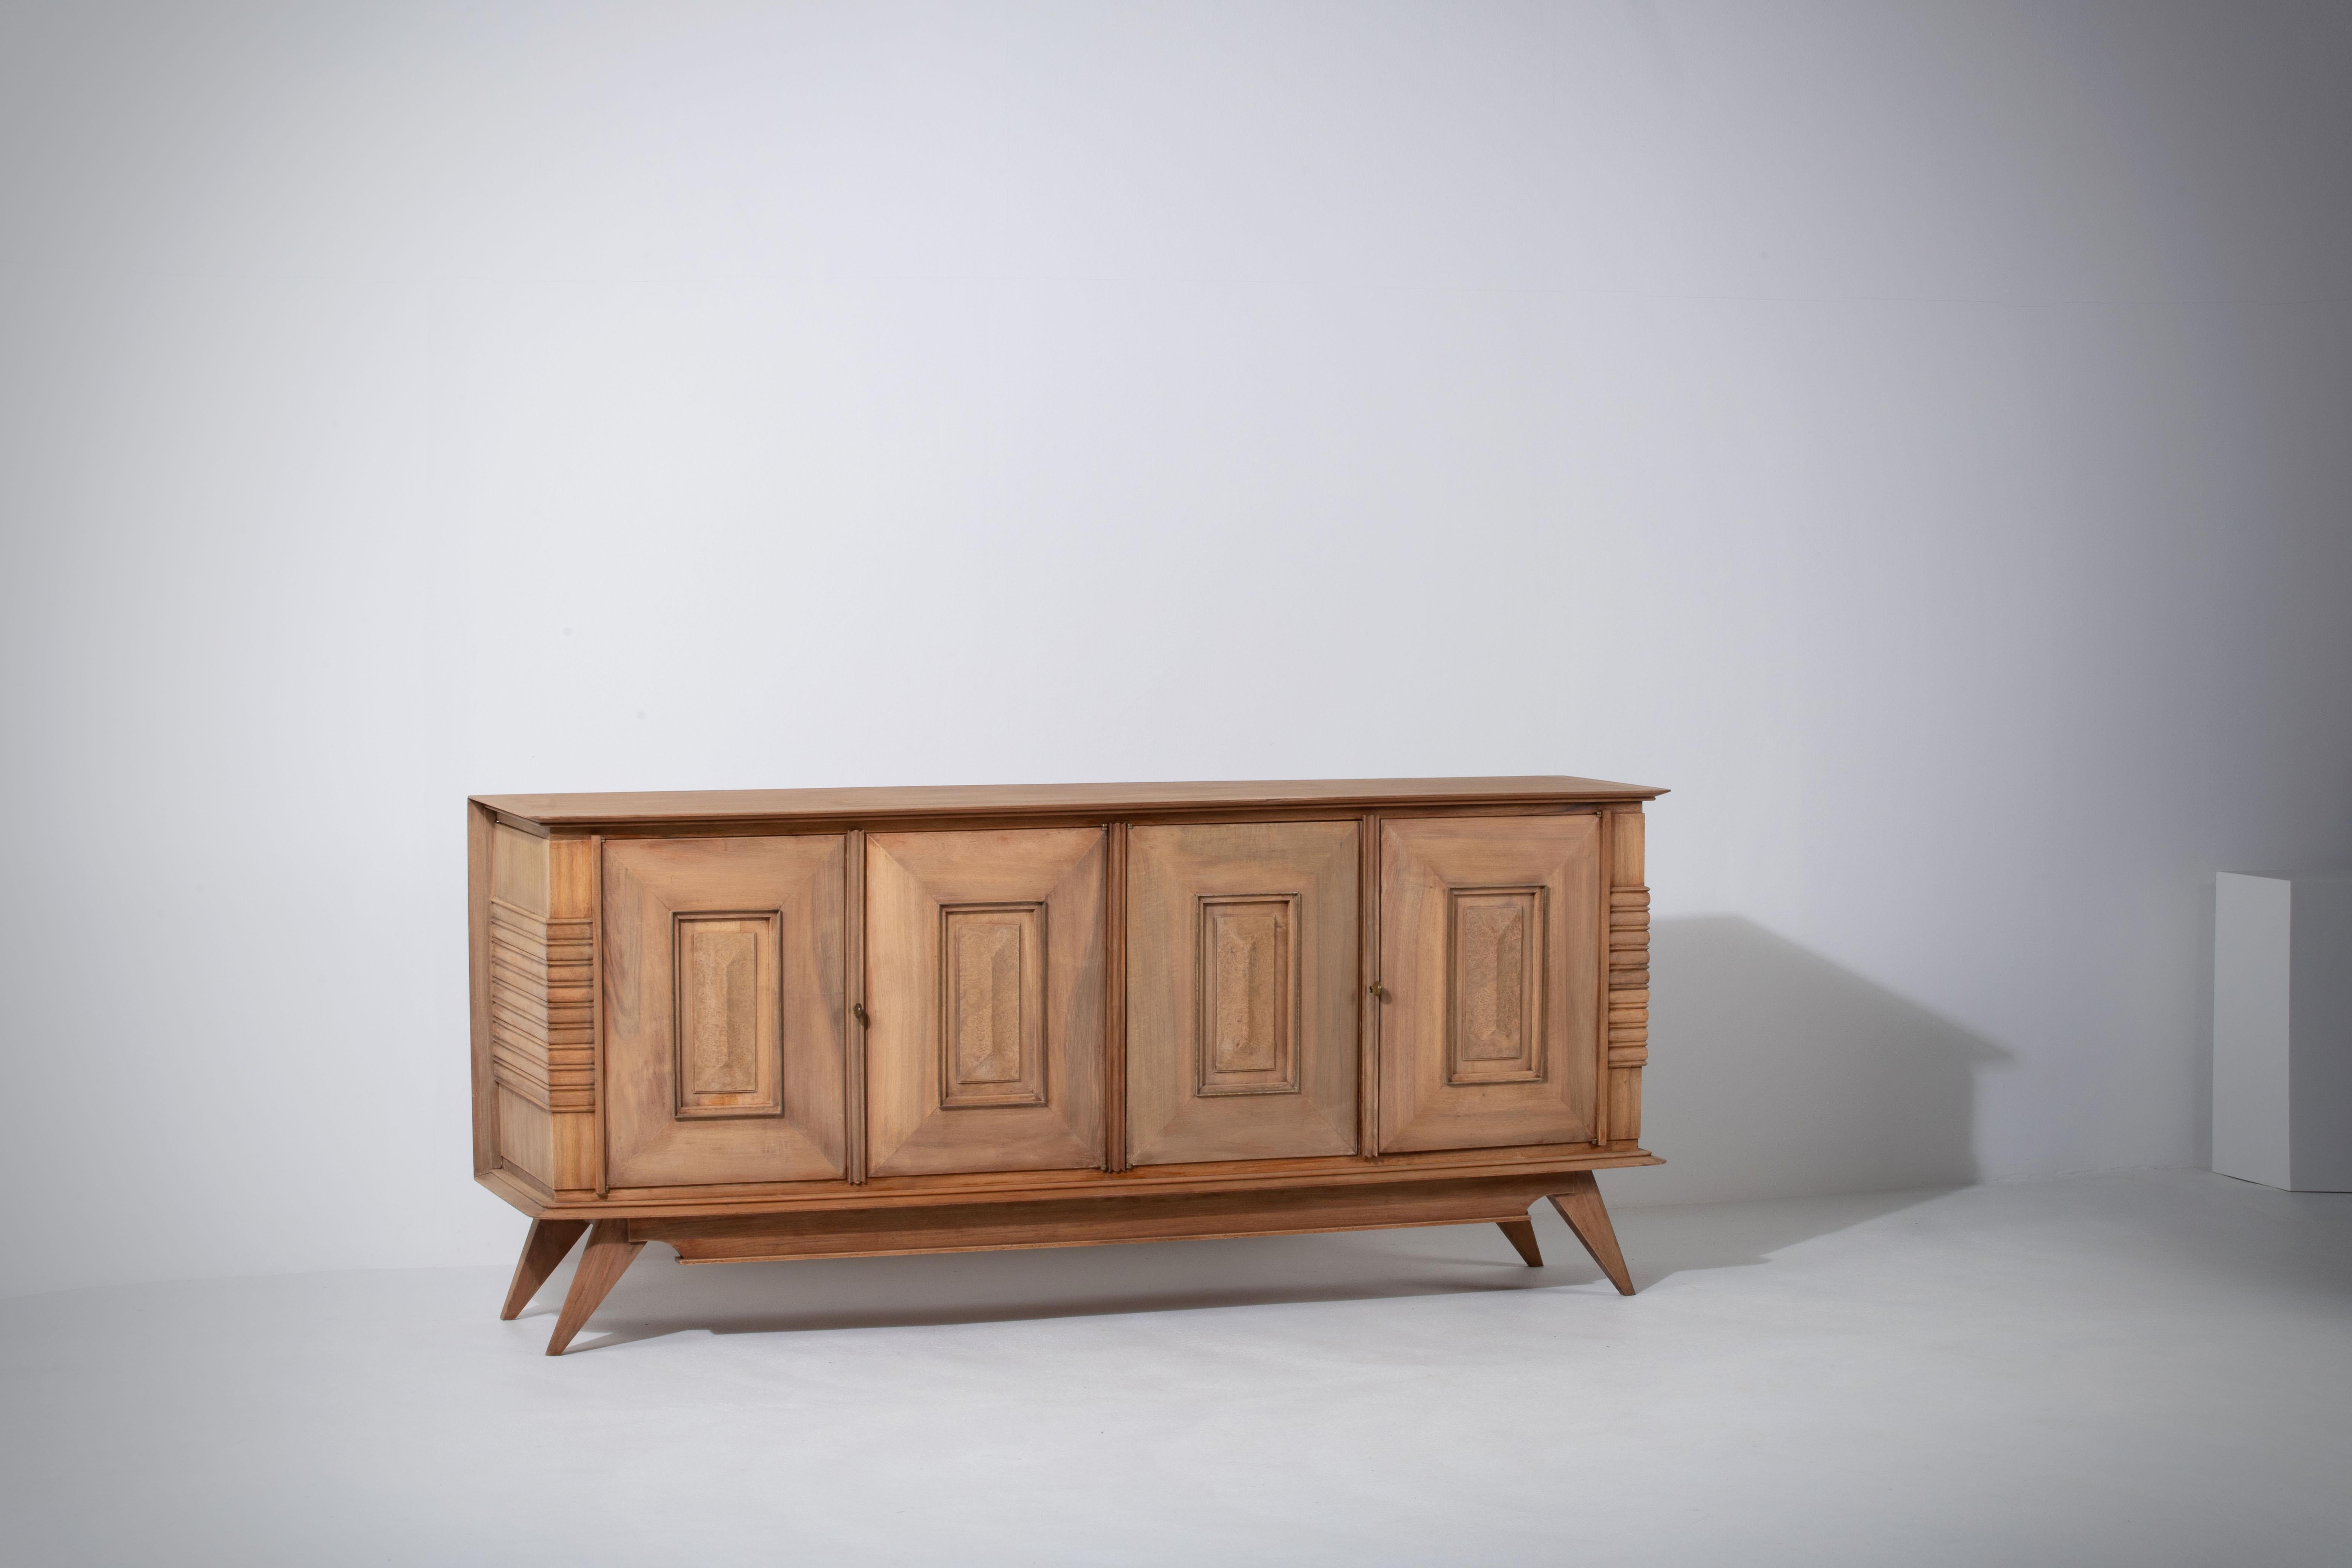 Credenza, solid oak, France, 1940s.
The credenza consists of four storage facilities covered with detailed doors.
We offer this piece in a bleached finish.